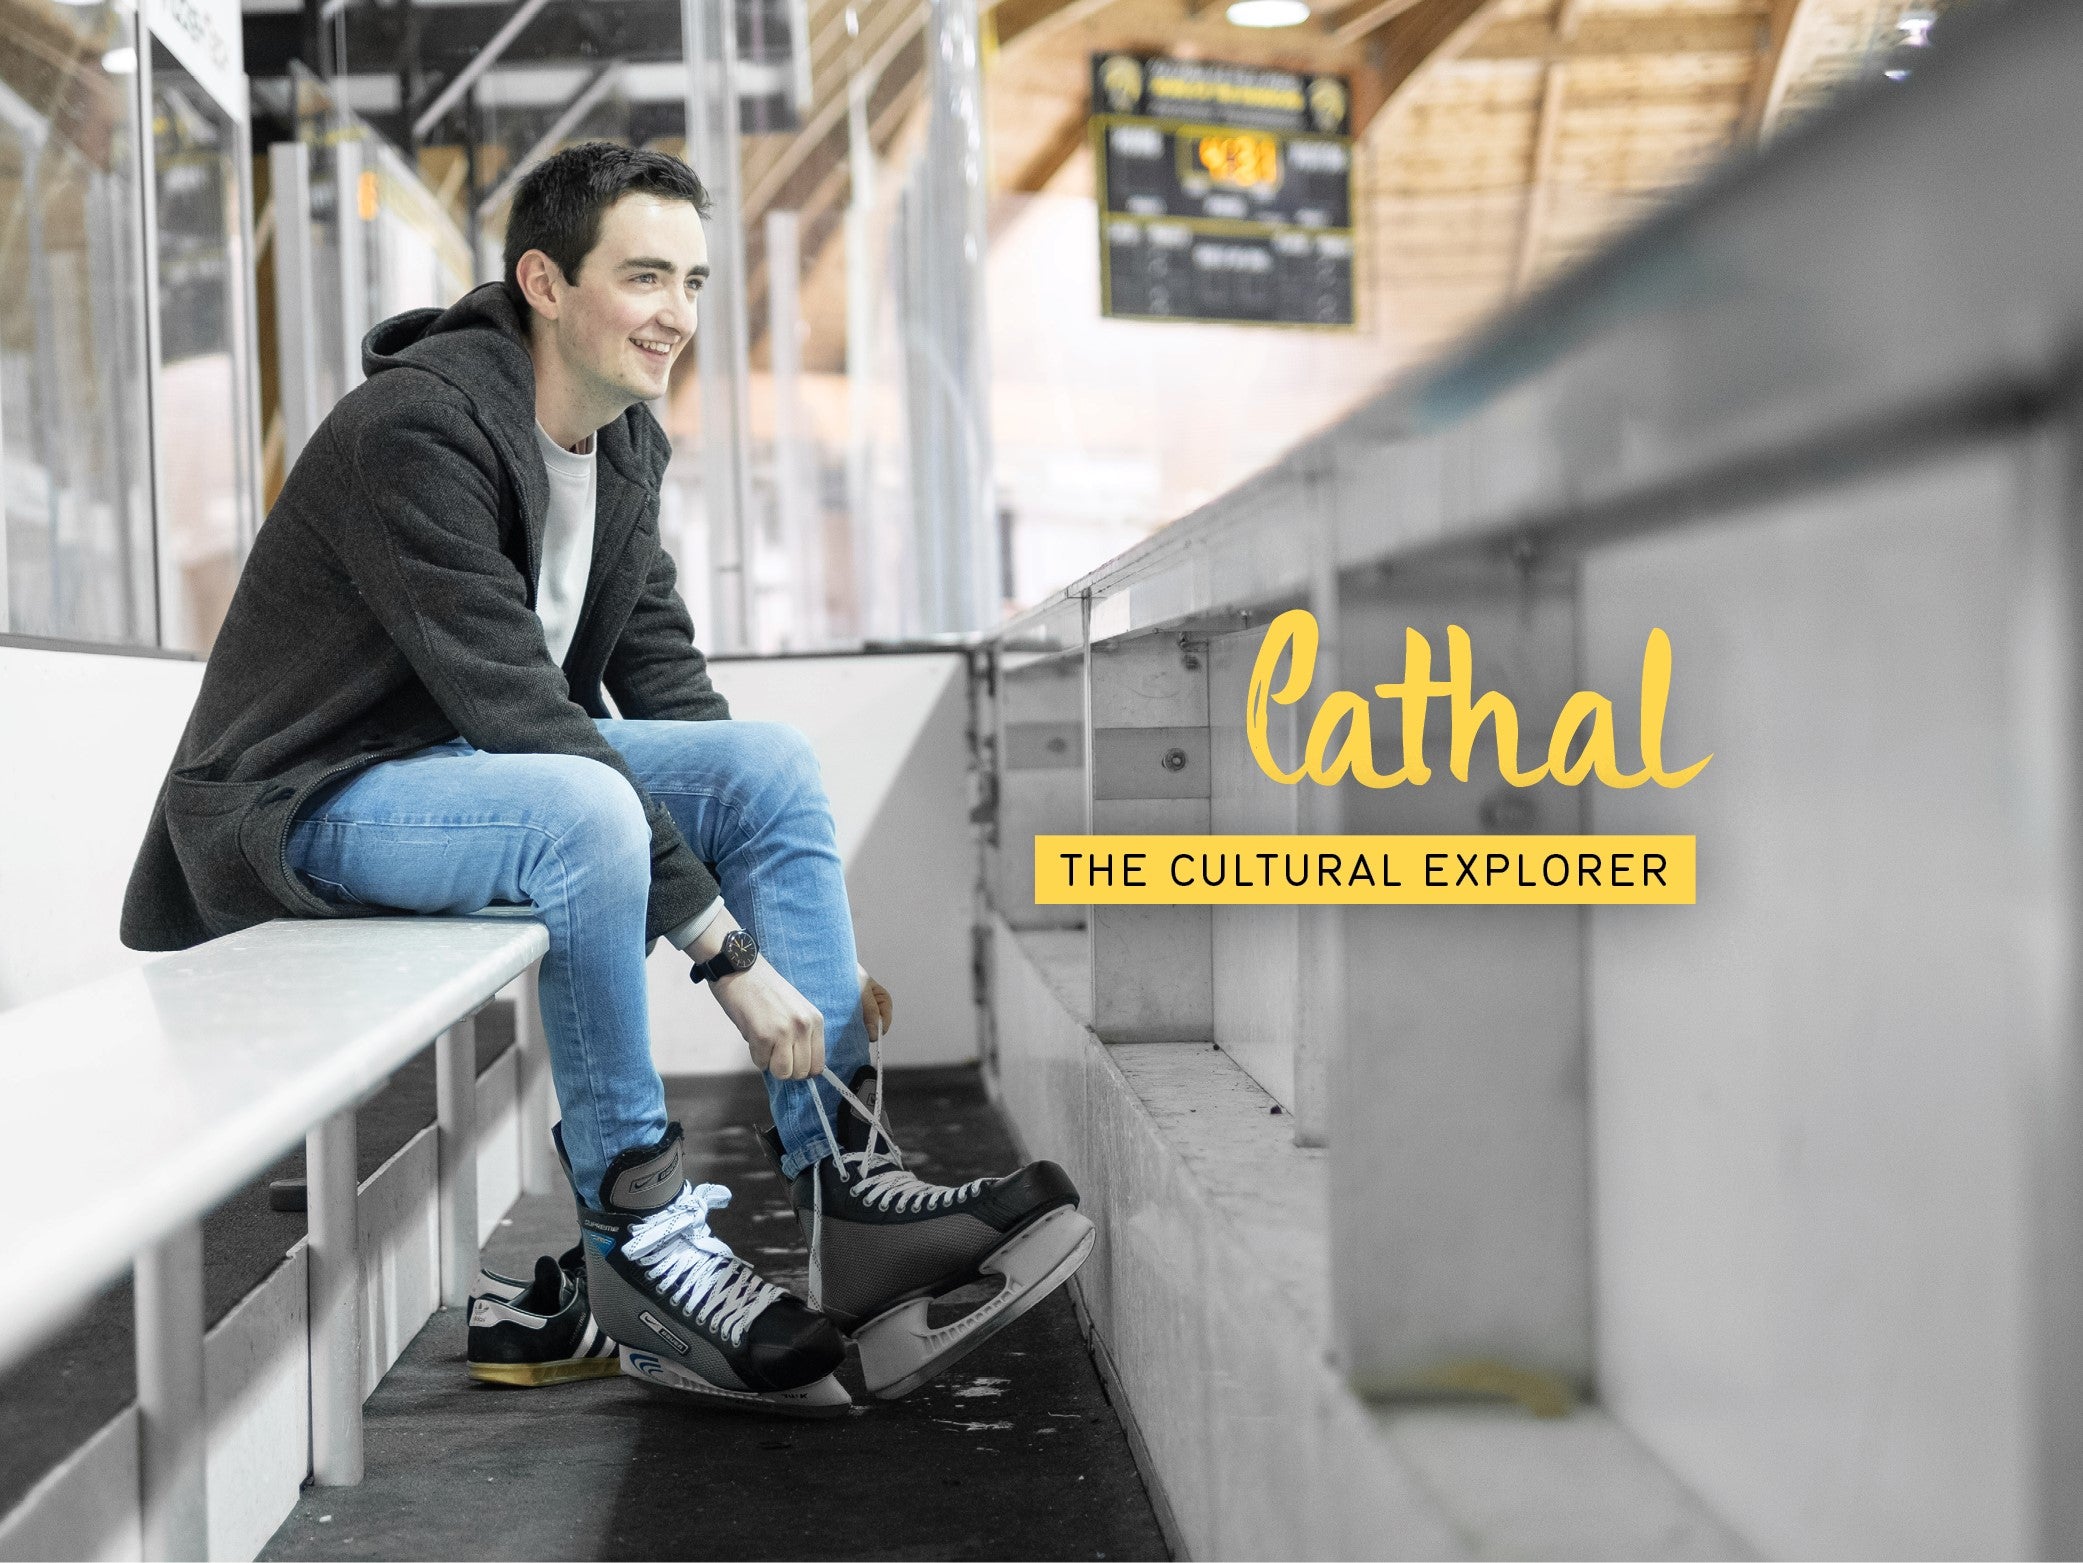 Cathal: the cultural explorer